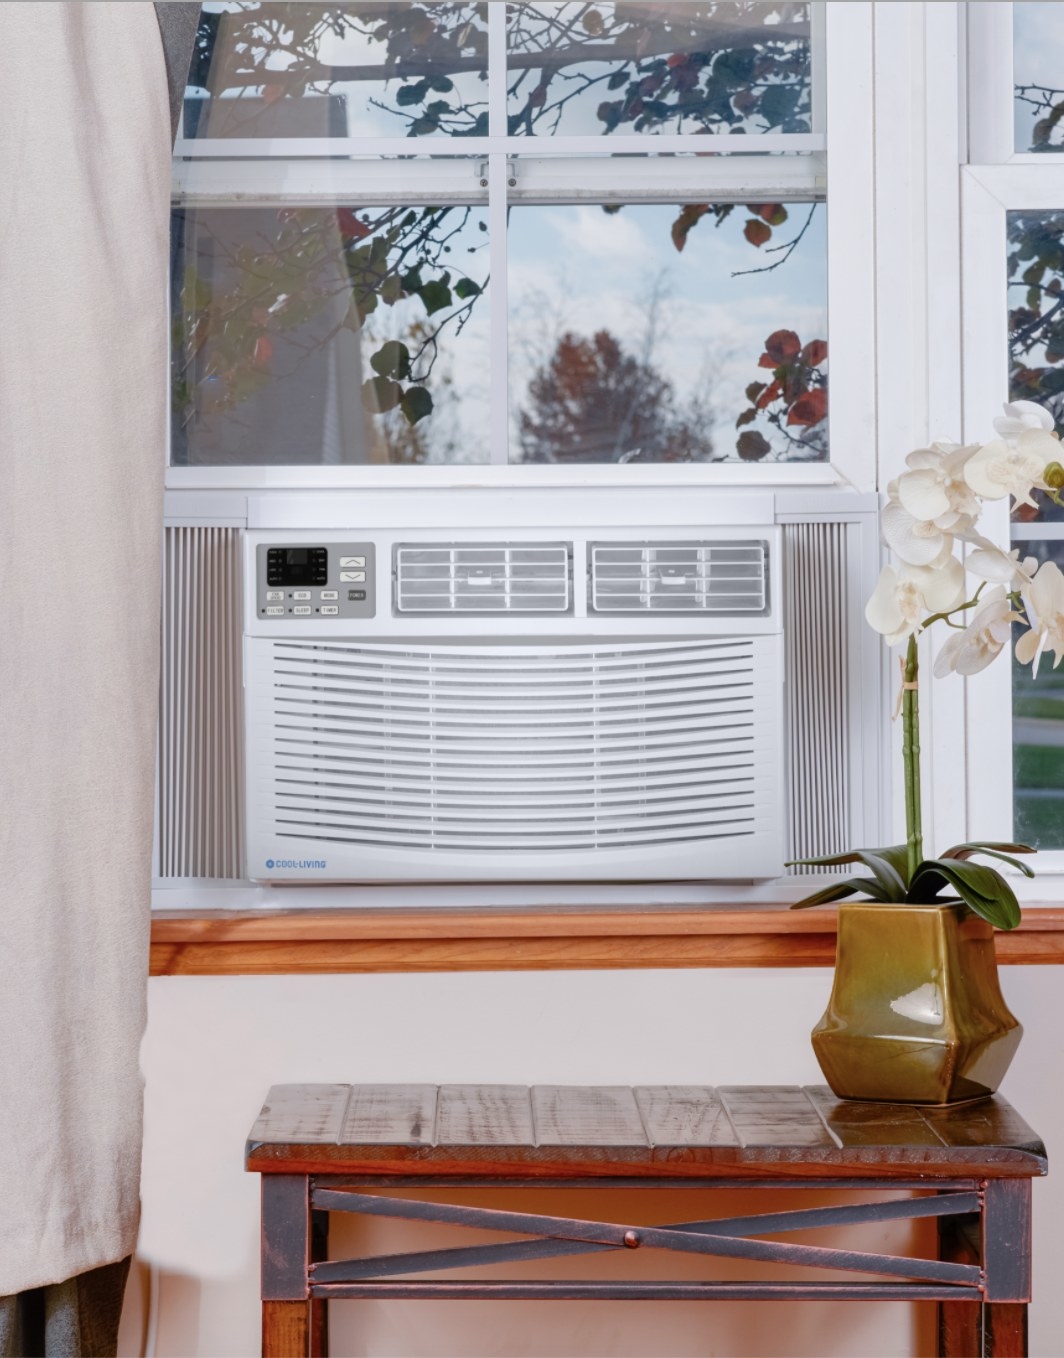 The white window air conditioner is in an open window and surrounded by a tree and flowers